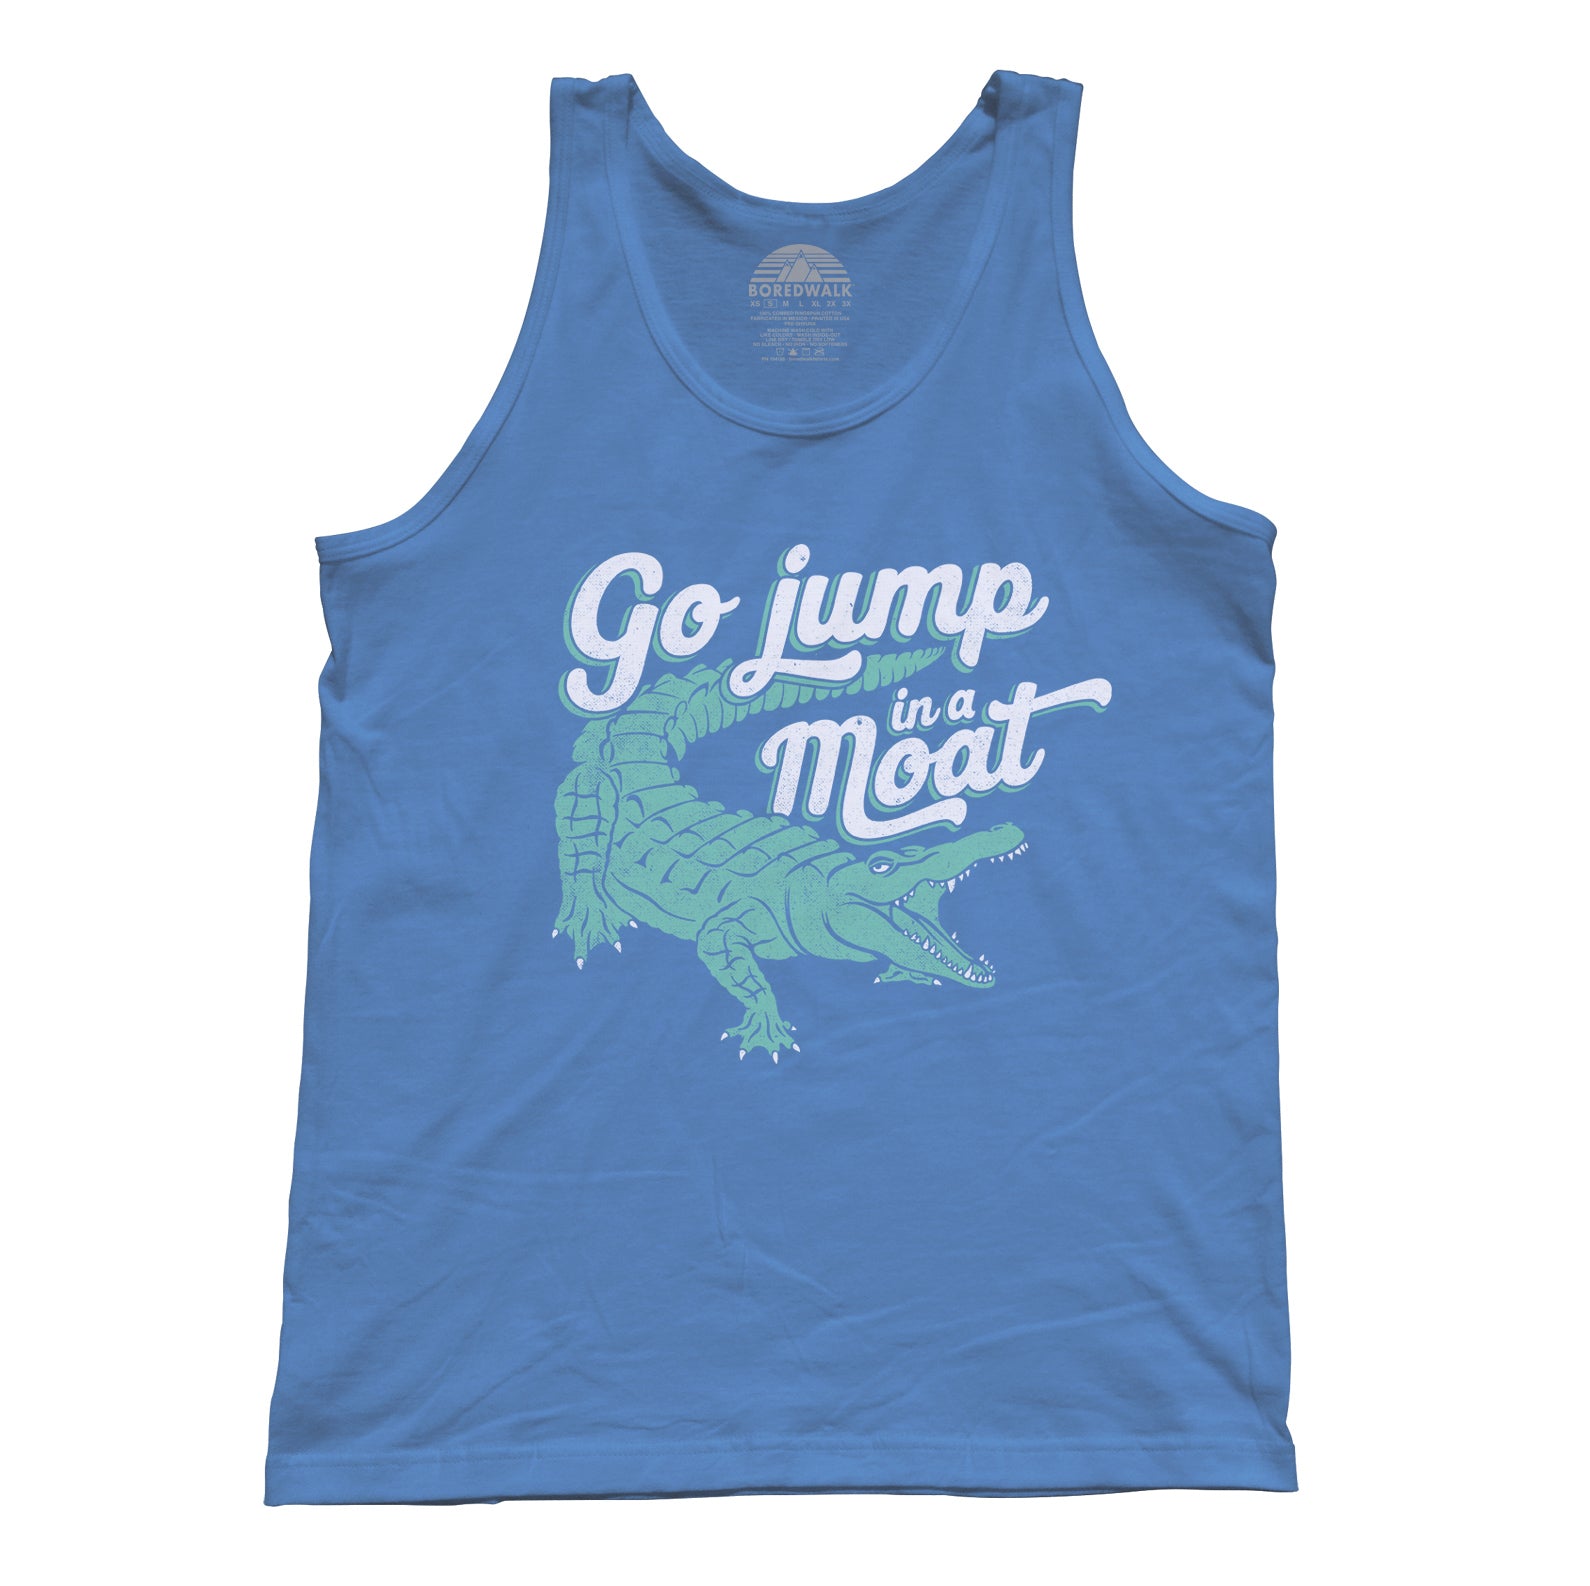 Unisex Go Jump in a Moat Alligator Tank Top